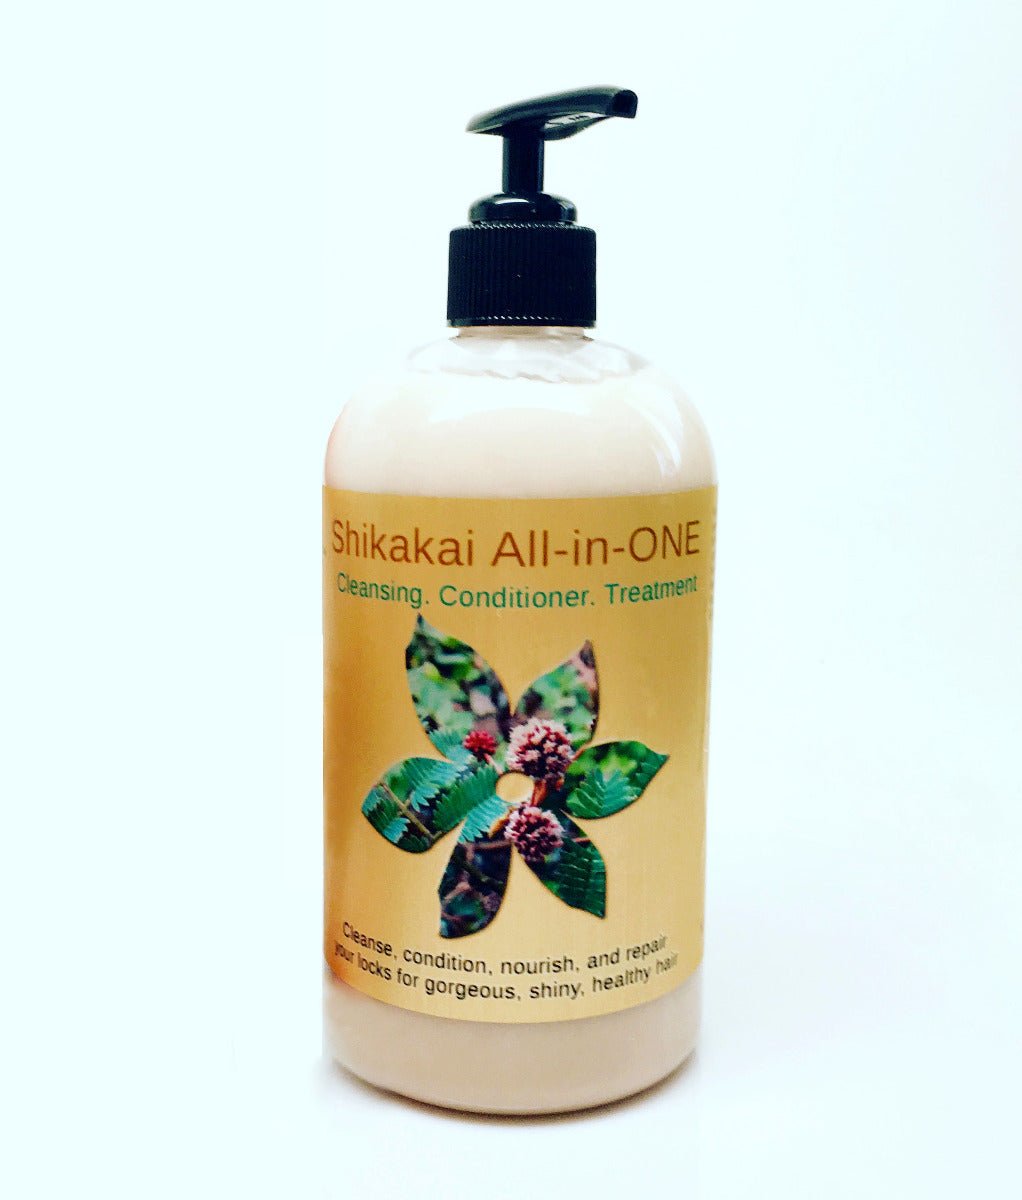 Shikakai All- IN -ONE Cleansing Conditioner - Nature Skin Shop